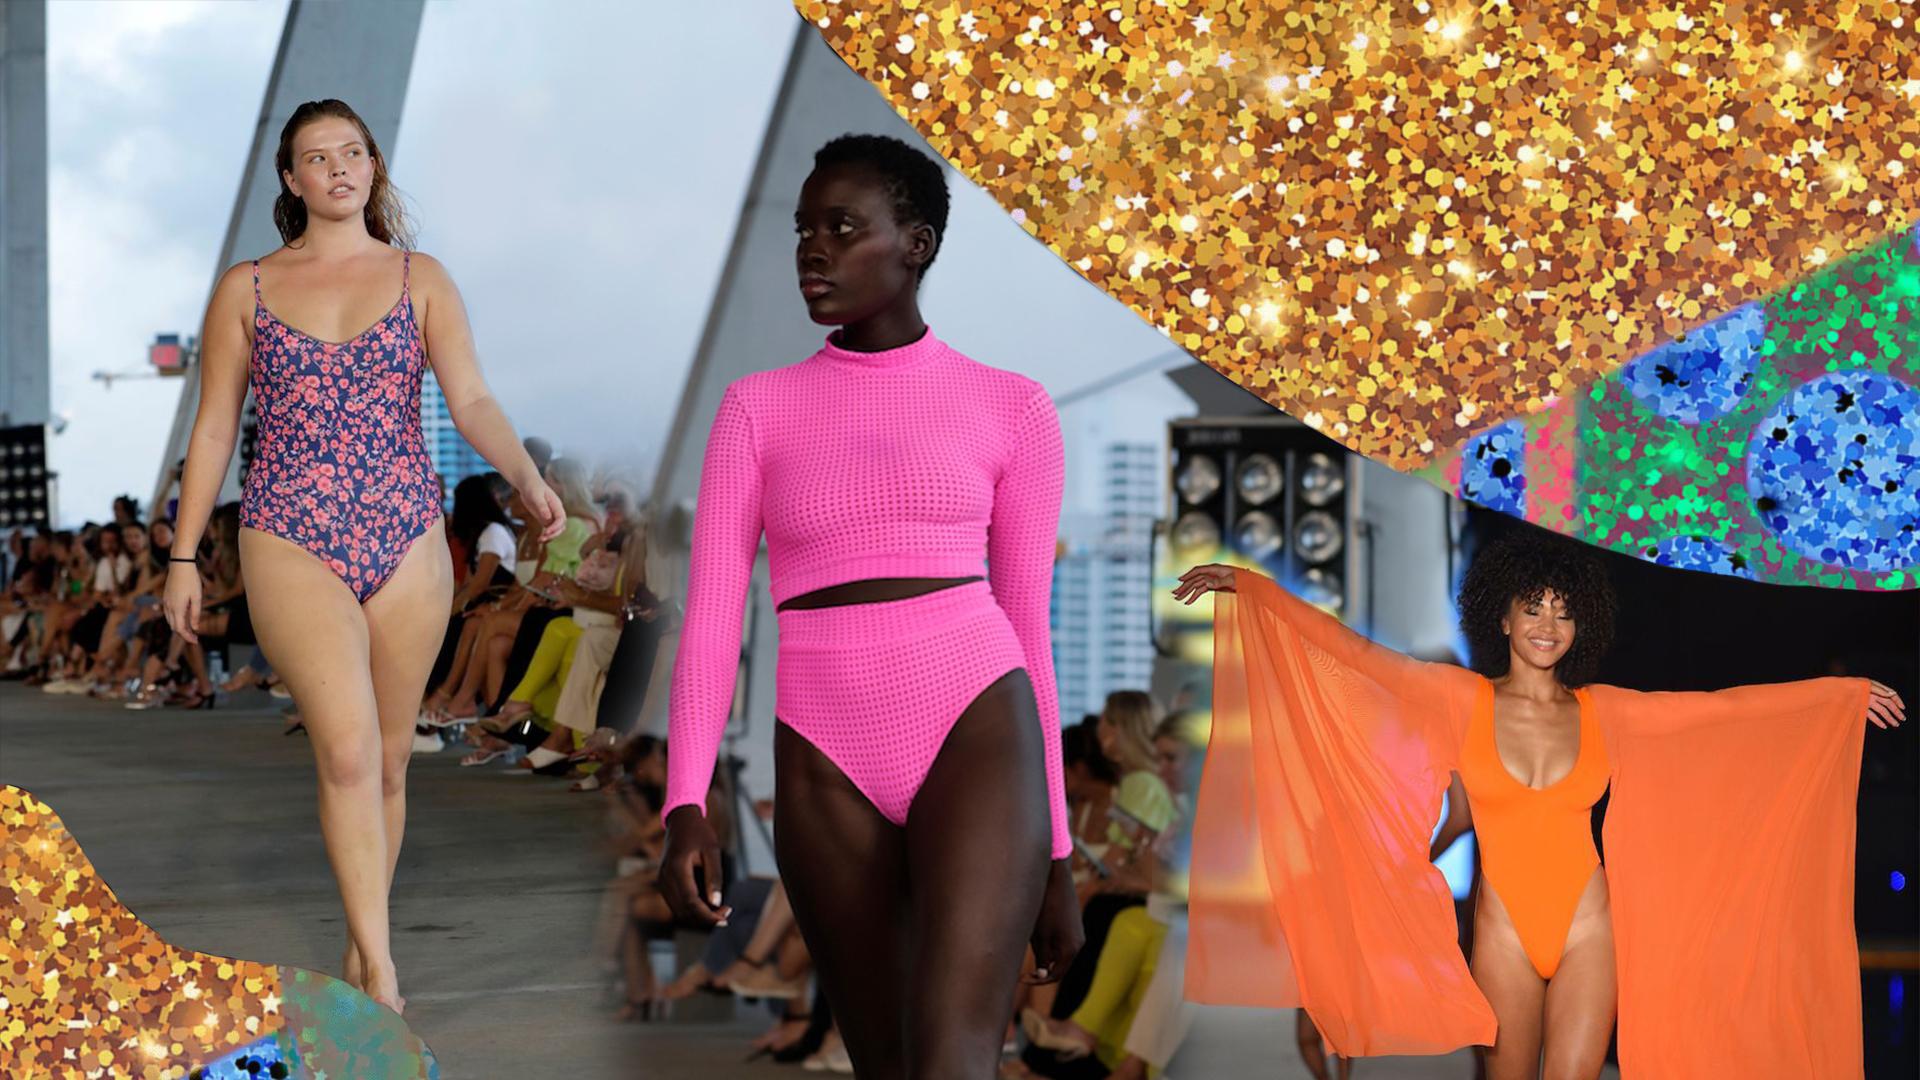 The 2020 Swimwear & Bathing Suit Trends, According to the Runways | StyleCaster